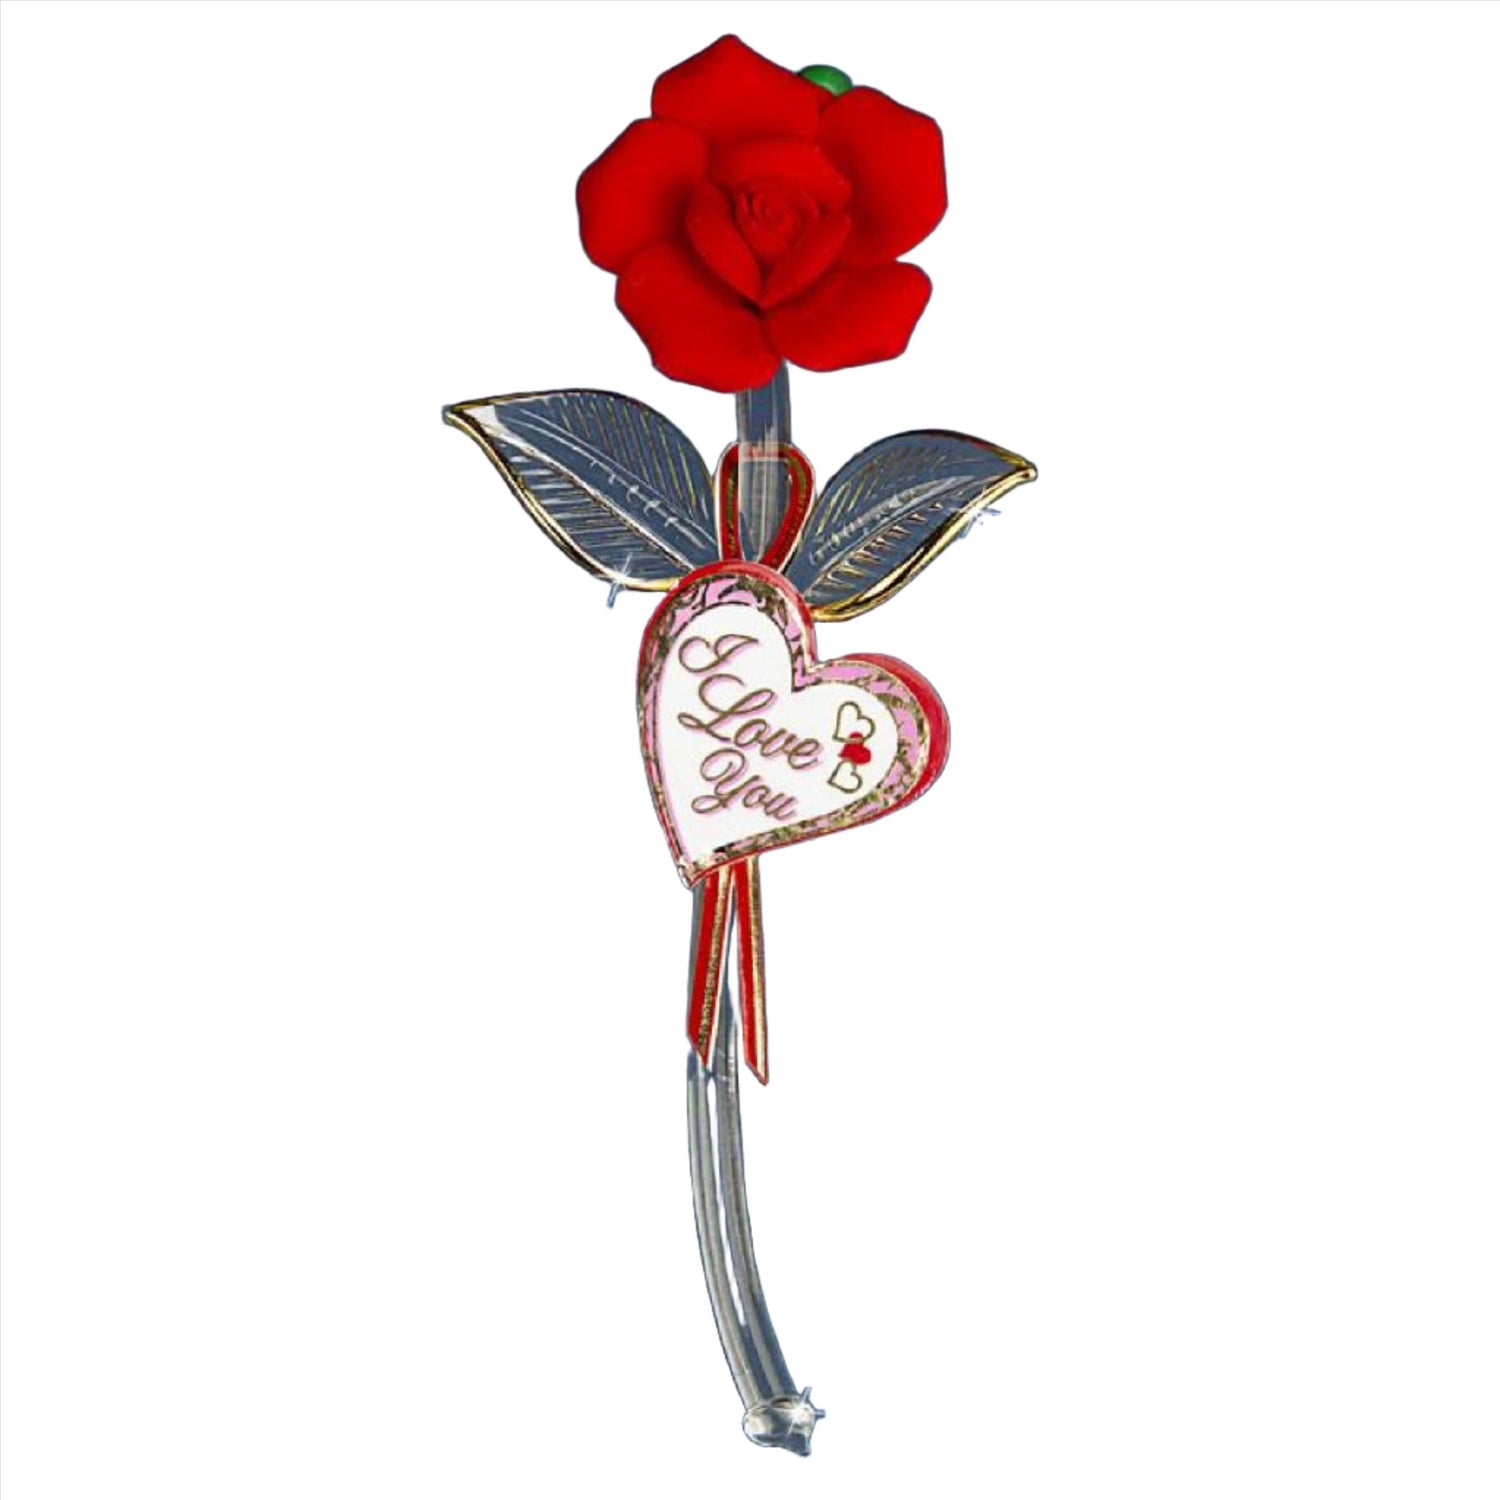 Glass Baron "I Love You" Red Rose Small Figure